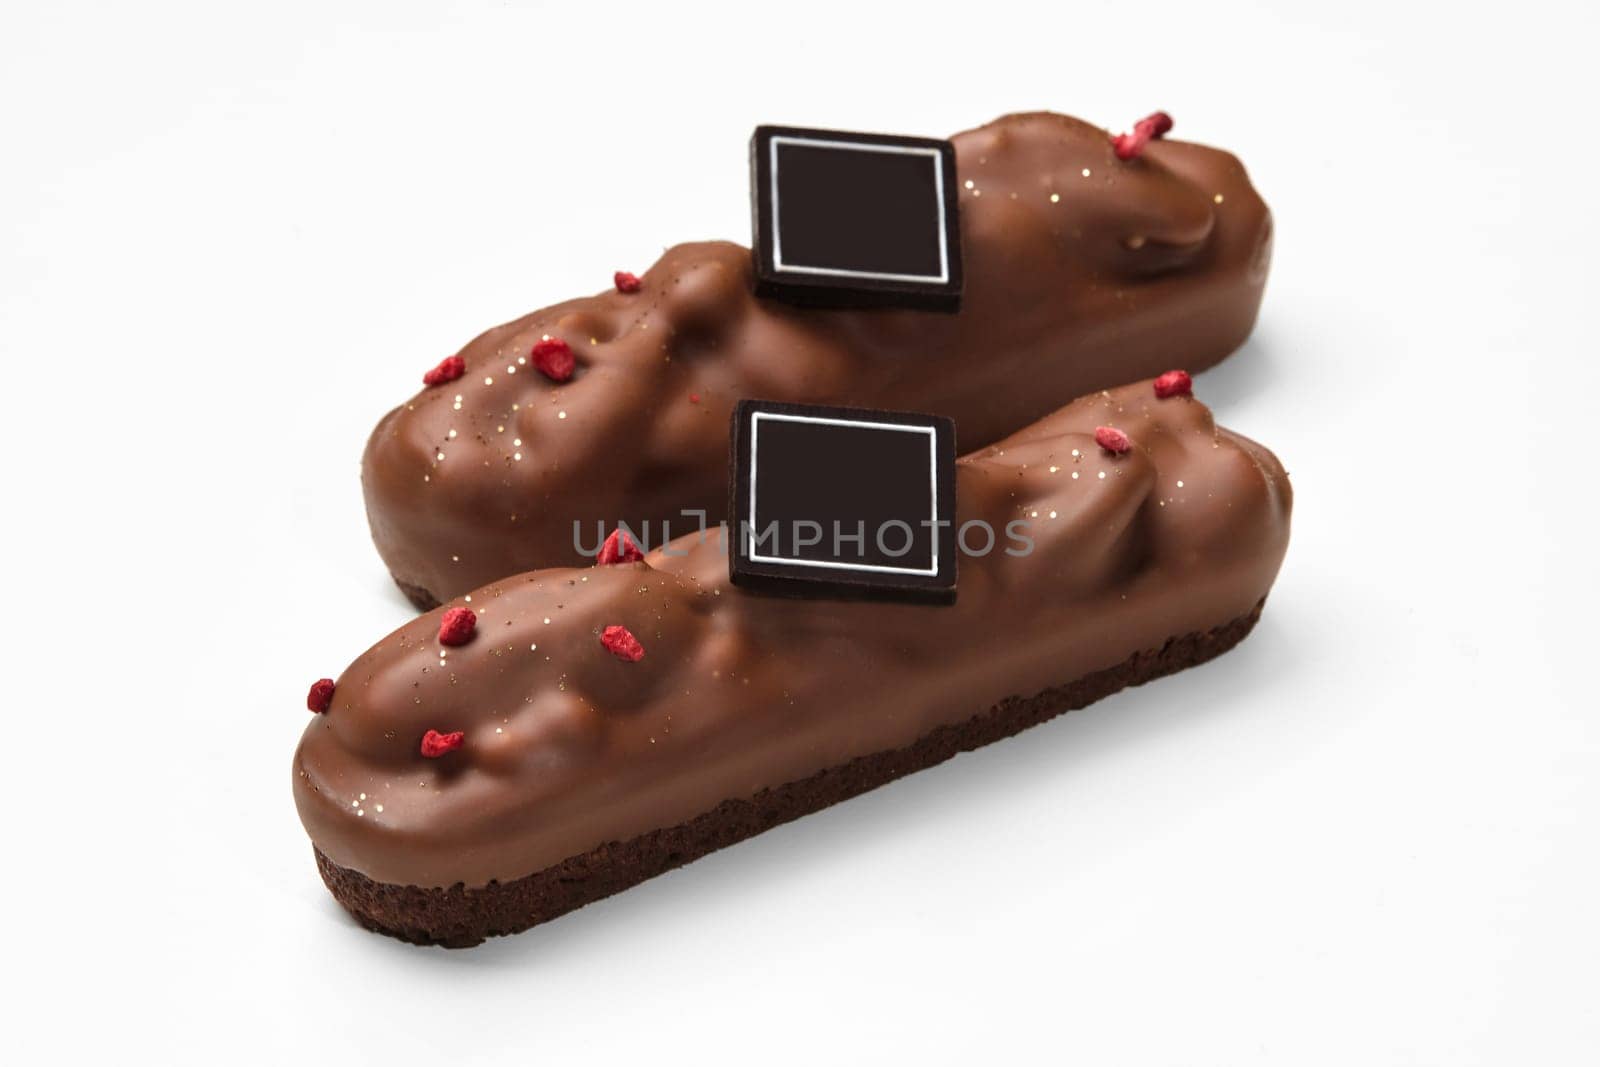 Two streusel-based bars topped with pecans, coated in milk chocolate, adorned with dried berries and dark chocolate brand plaque, on white background. Artisan handmade sweets